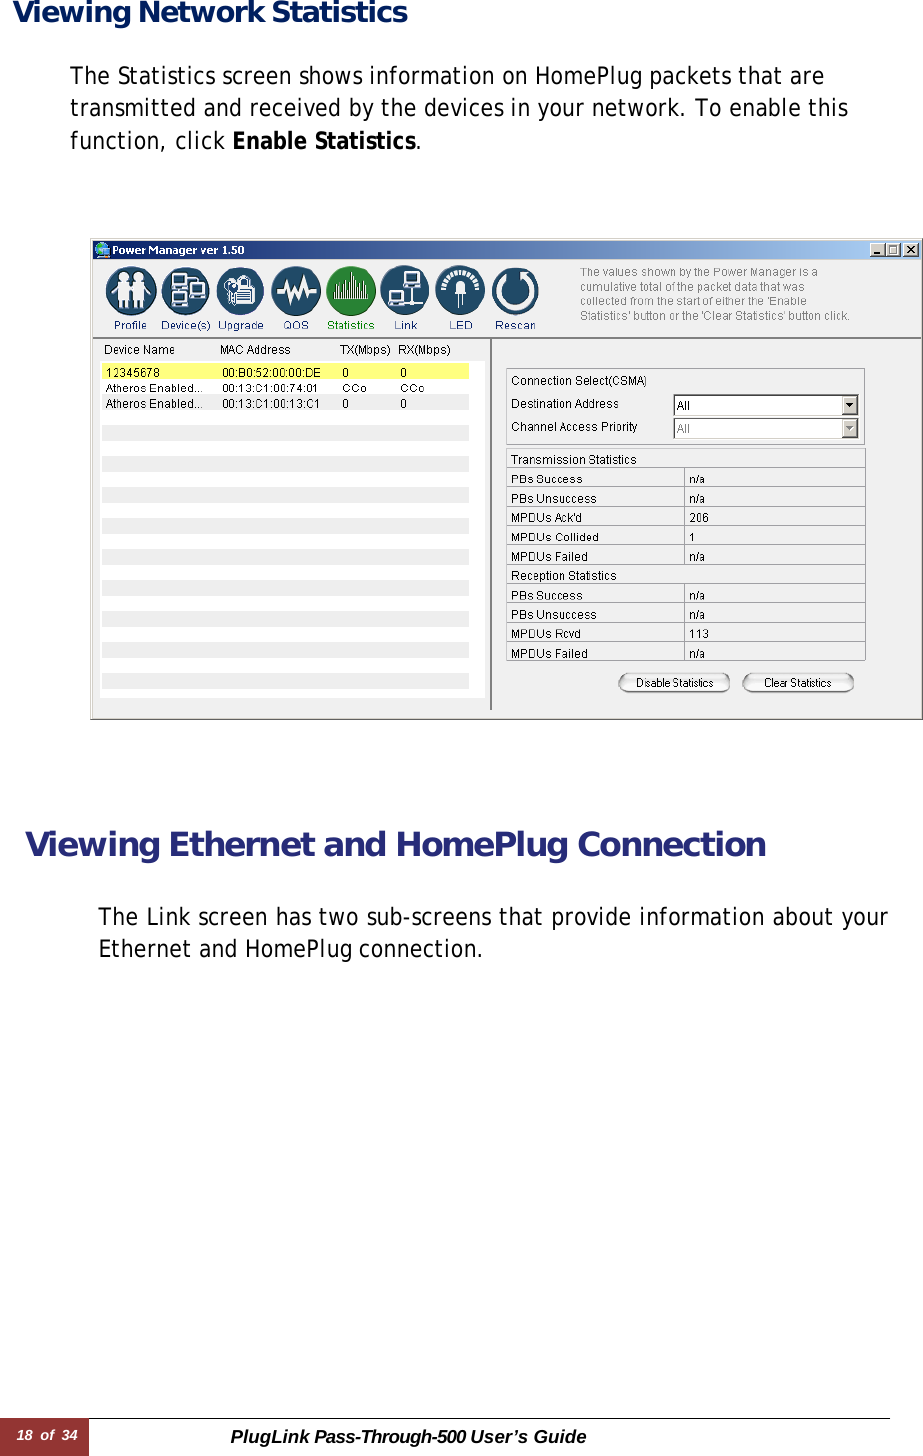 18 of 34 PlugLink Pass-Through-500 User’s Guide  Viewing Network Statistics   The Statistics screen shows information on HomePlug packets that are transmitted and received by the devices in your network. To enable this function, click Enable Statistics.            Viewing Ethernet and HomePlug Connection   The Link screen has two sub-screens that provide information about your Ethernet and HomePlug connection. 